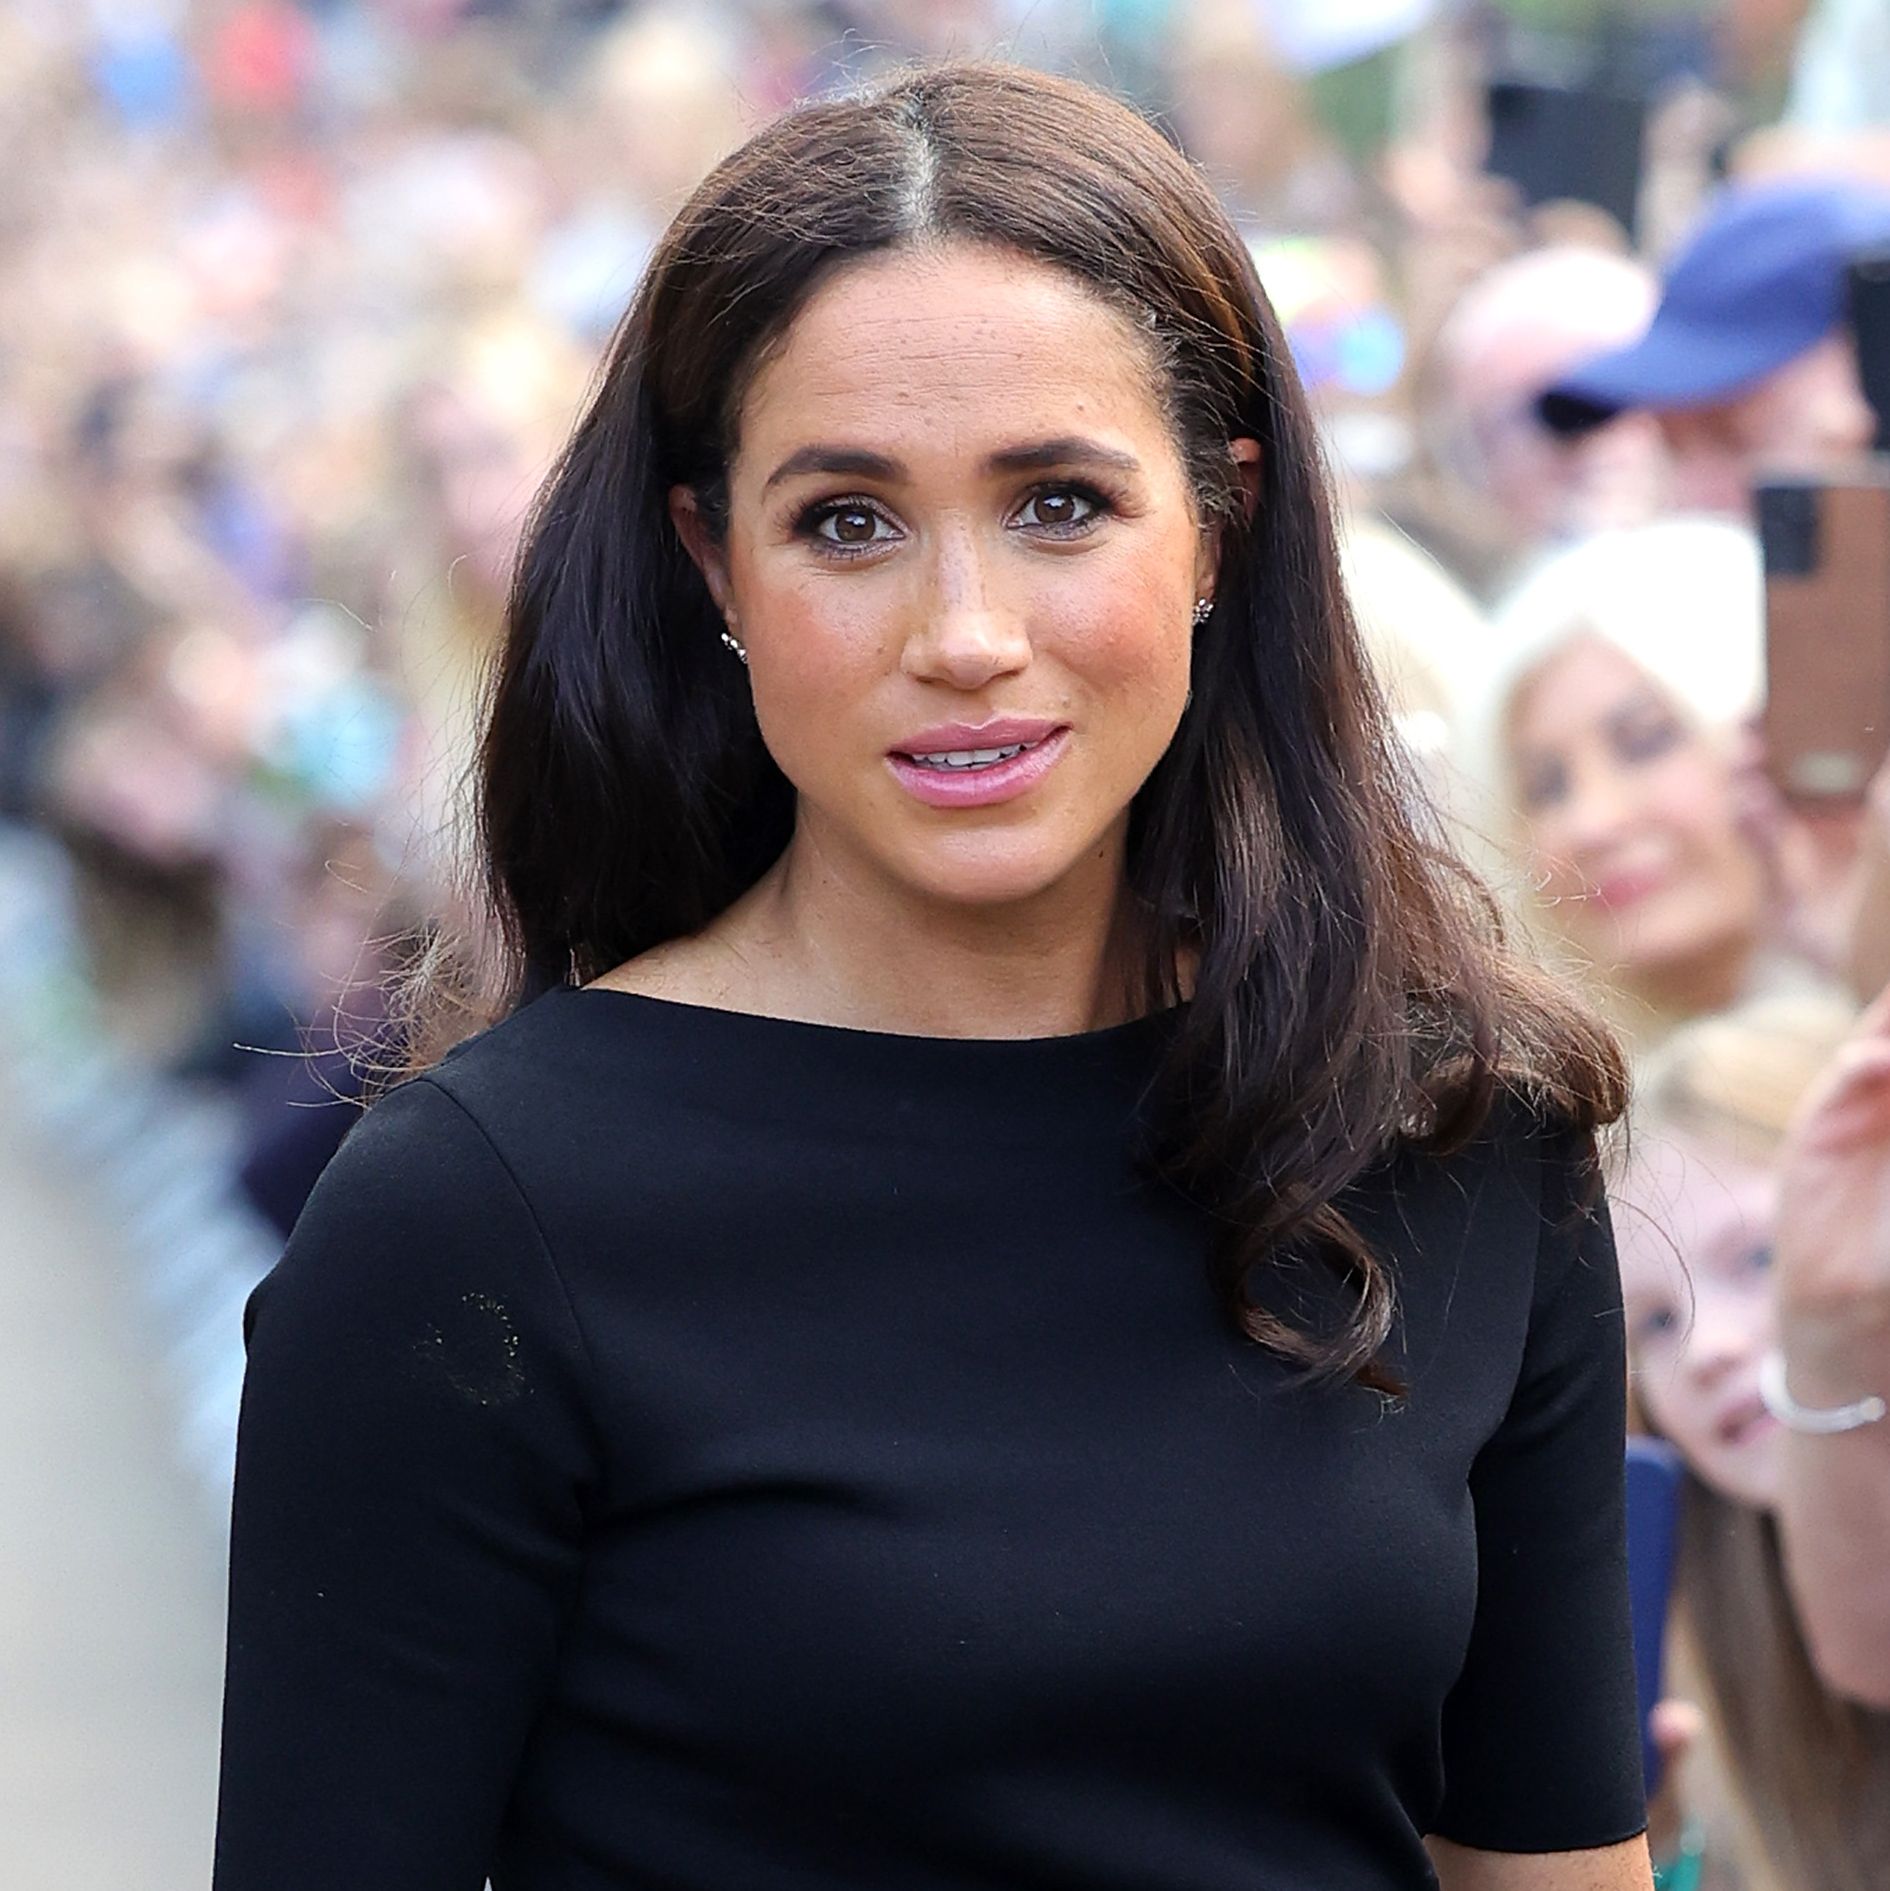 Meghan Markle Skipped the Gracie Awards and Is 'Shocked' and Hurt by Public Reaction to Car Chase